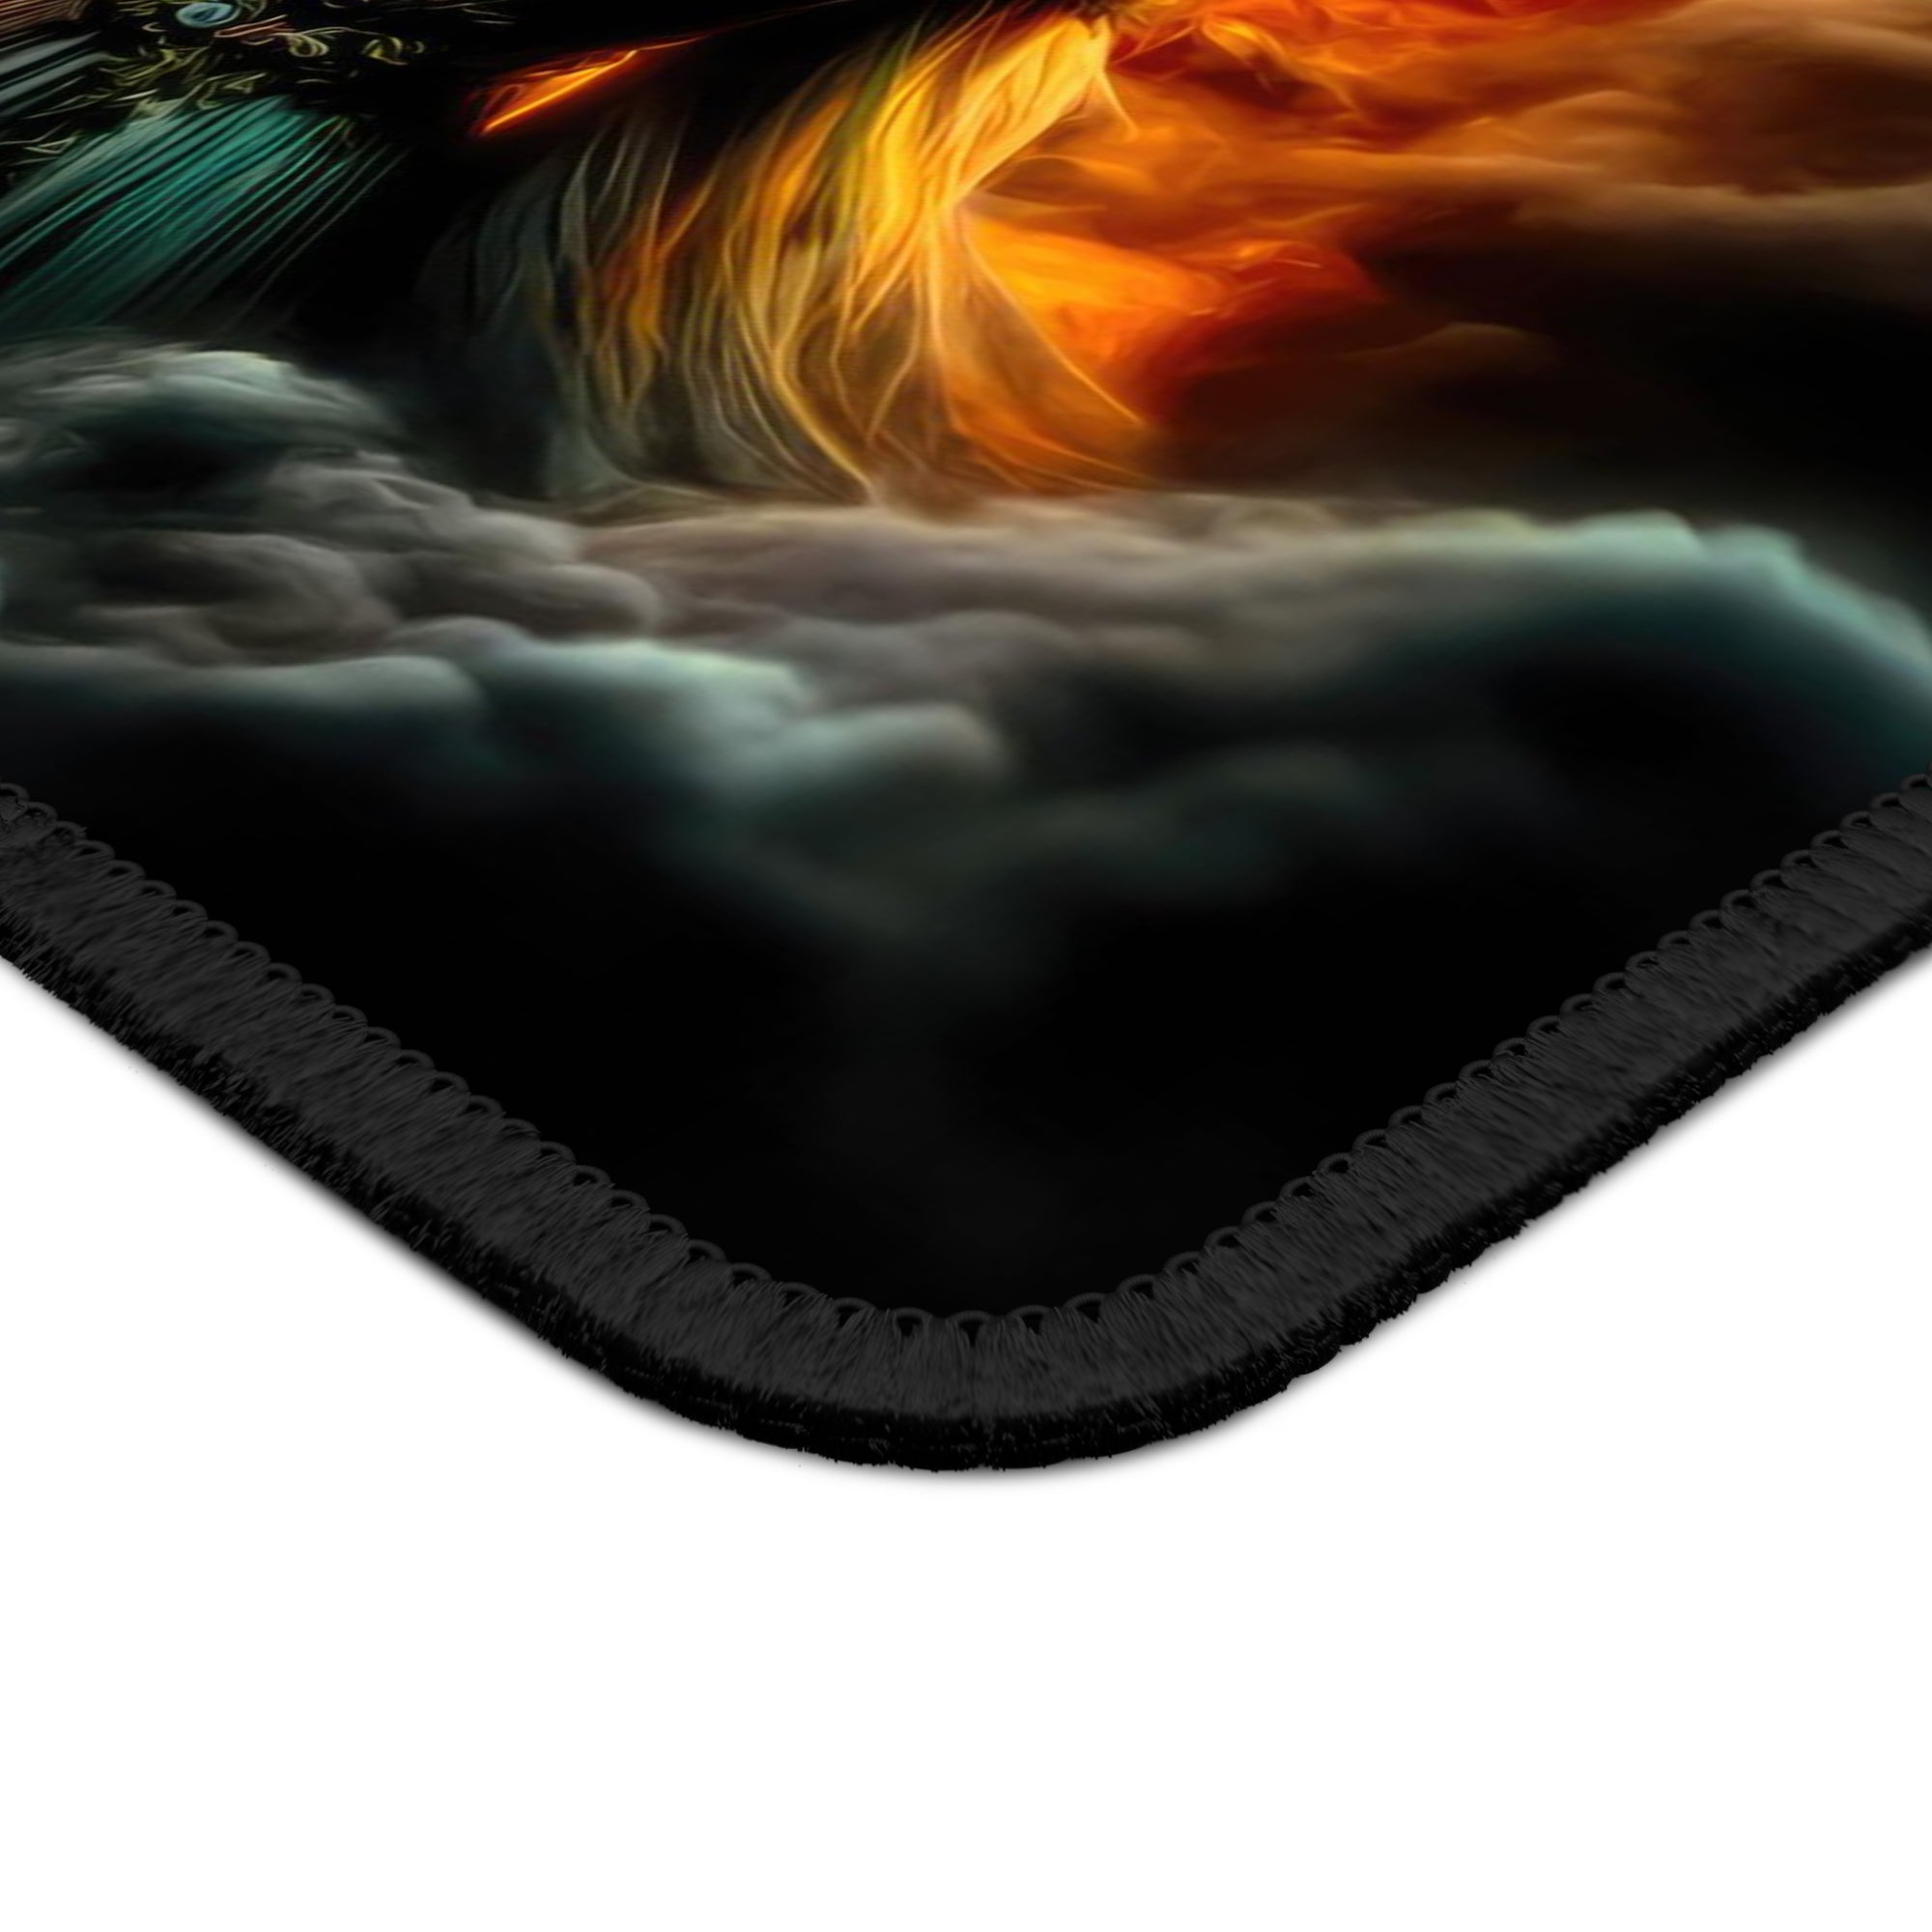 Mythical Fusion Gaming Mouse Pad